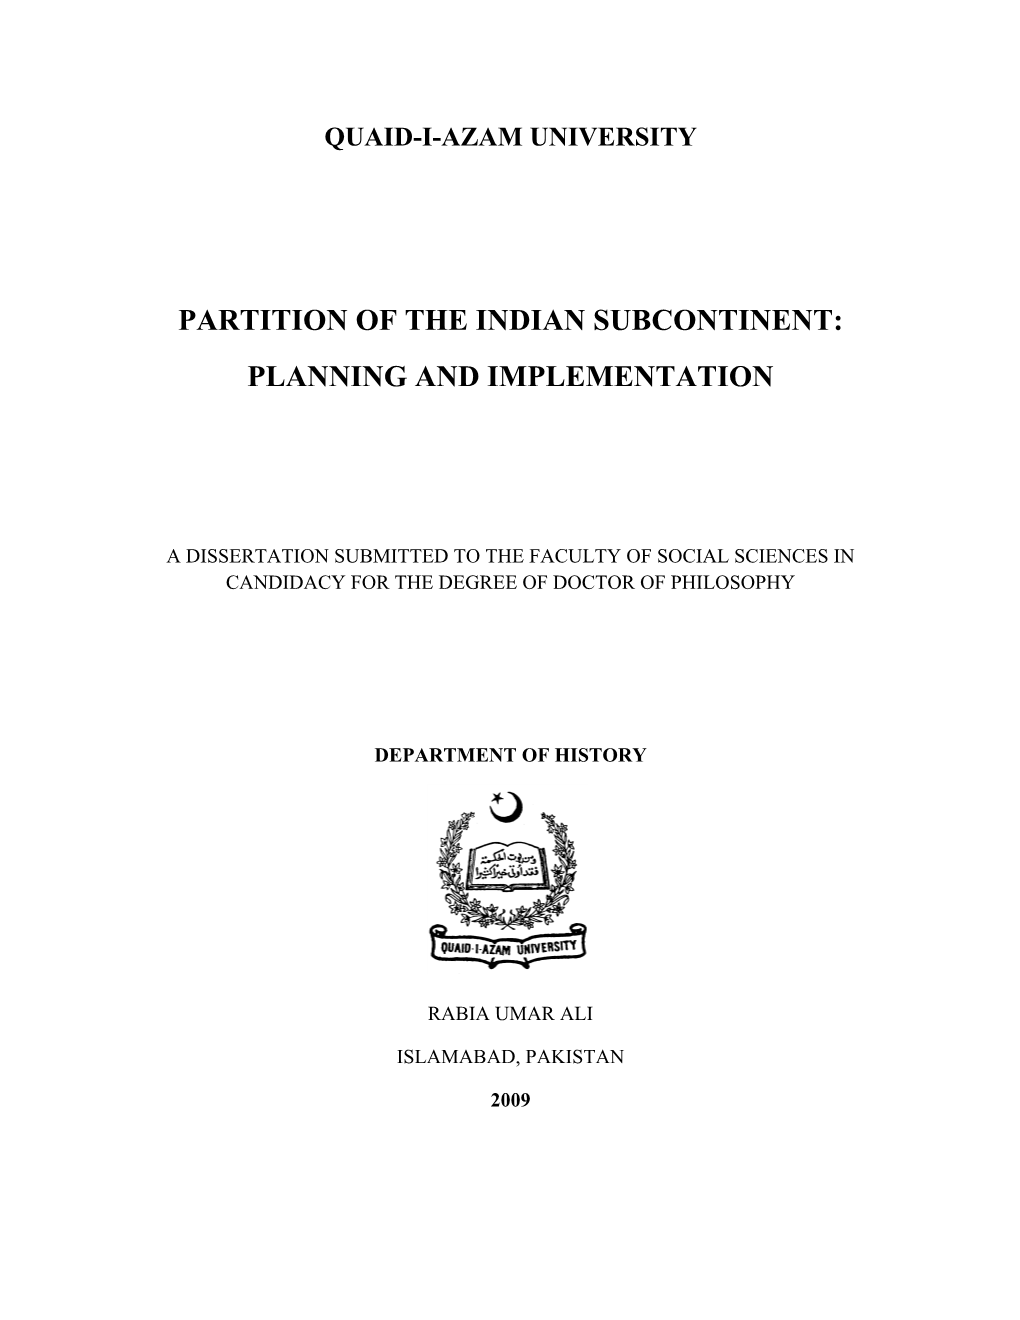 Partition of the Indian Subcontinent: Planning And